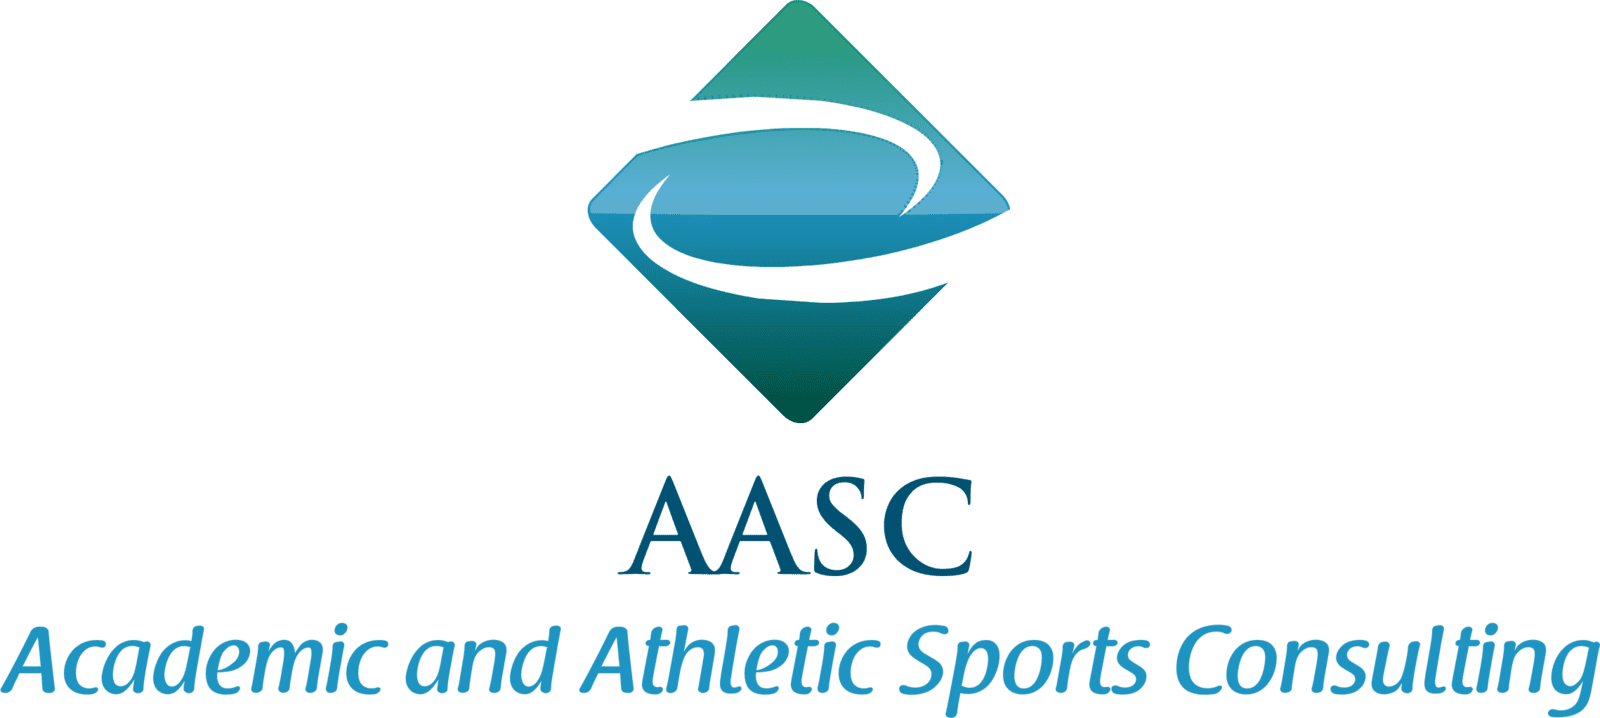 AASC Academic and Athletic Sports Consulting